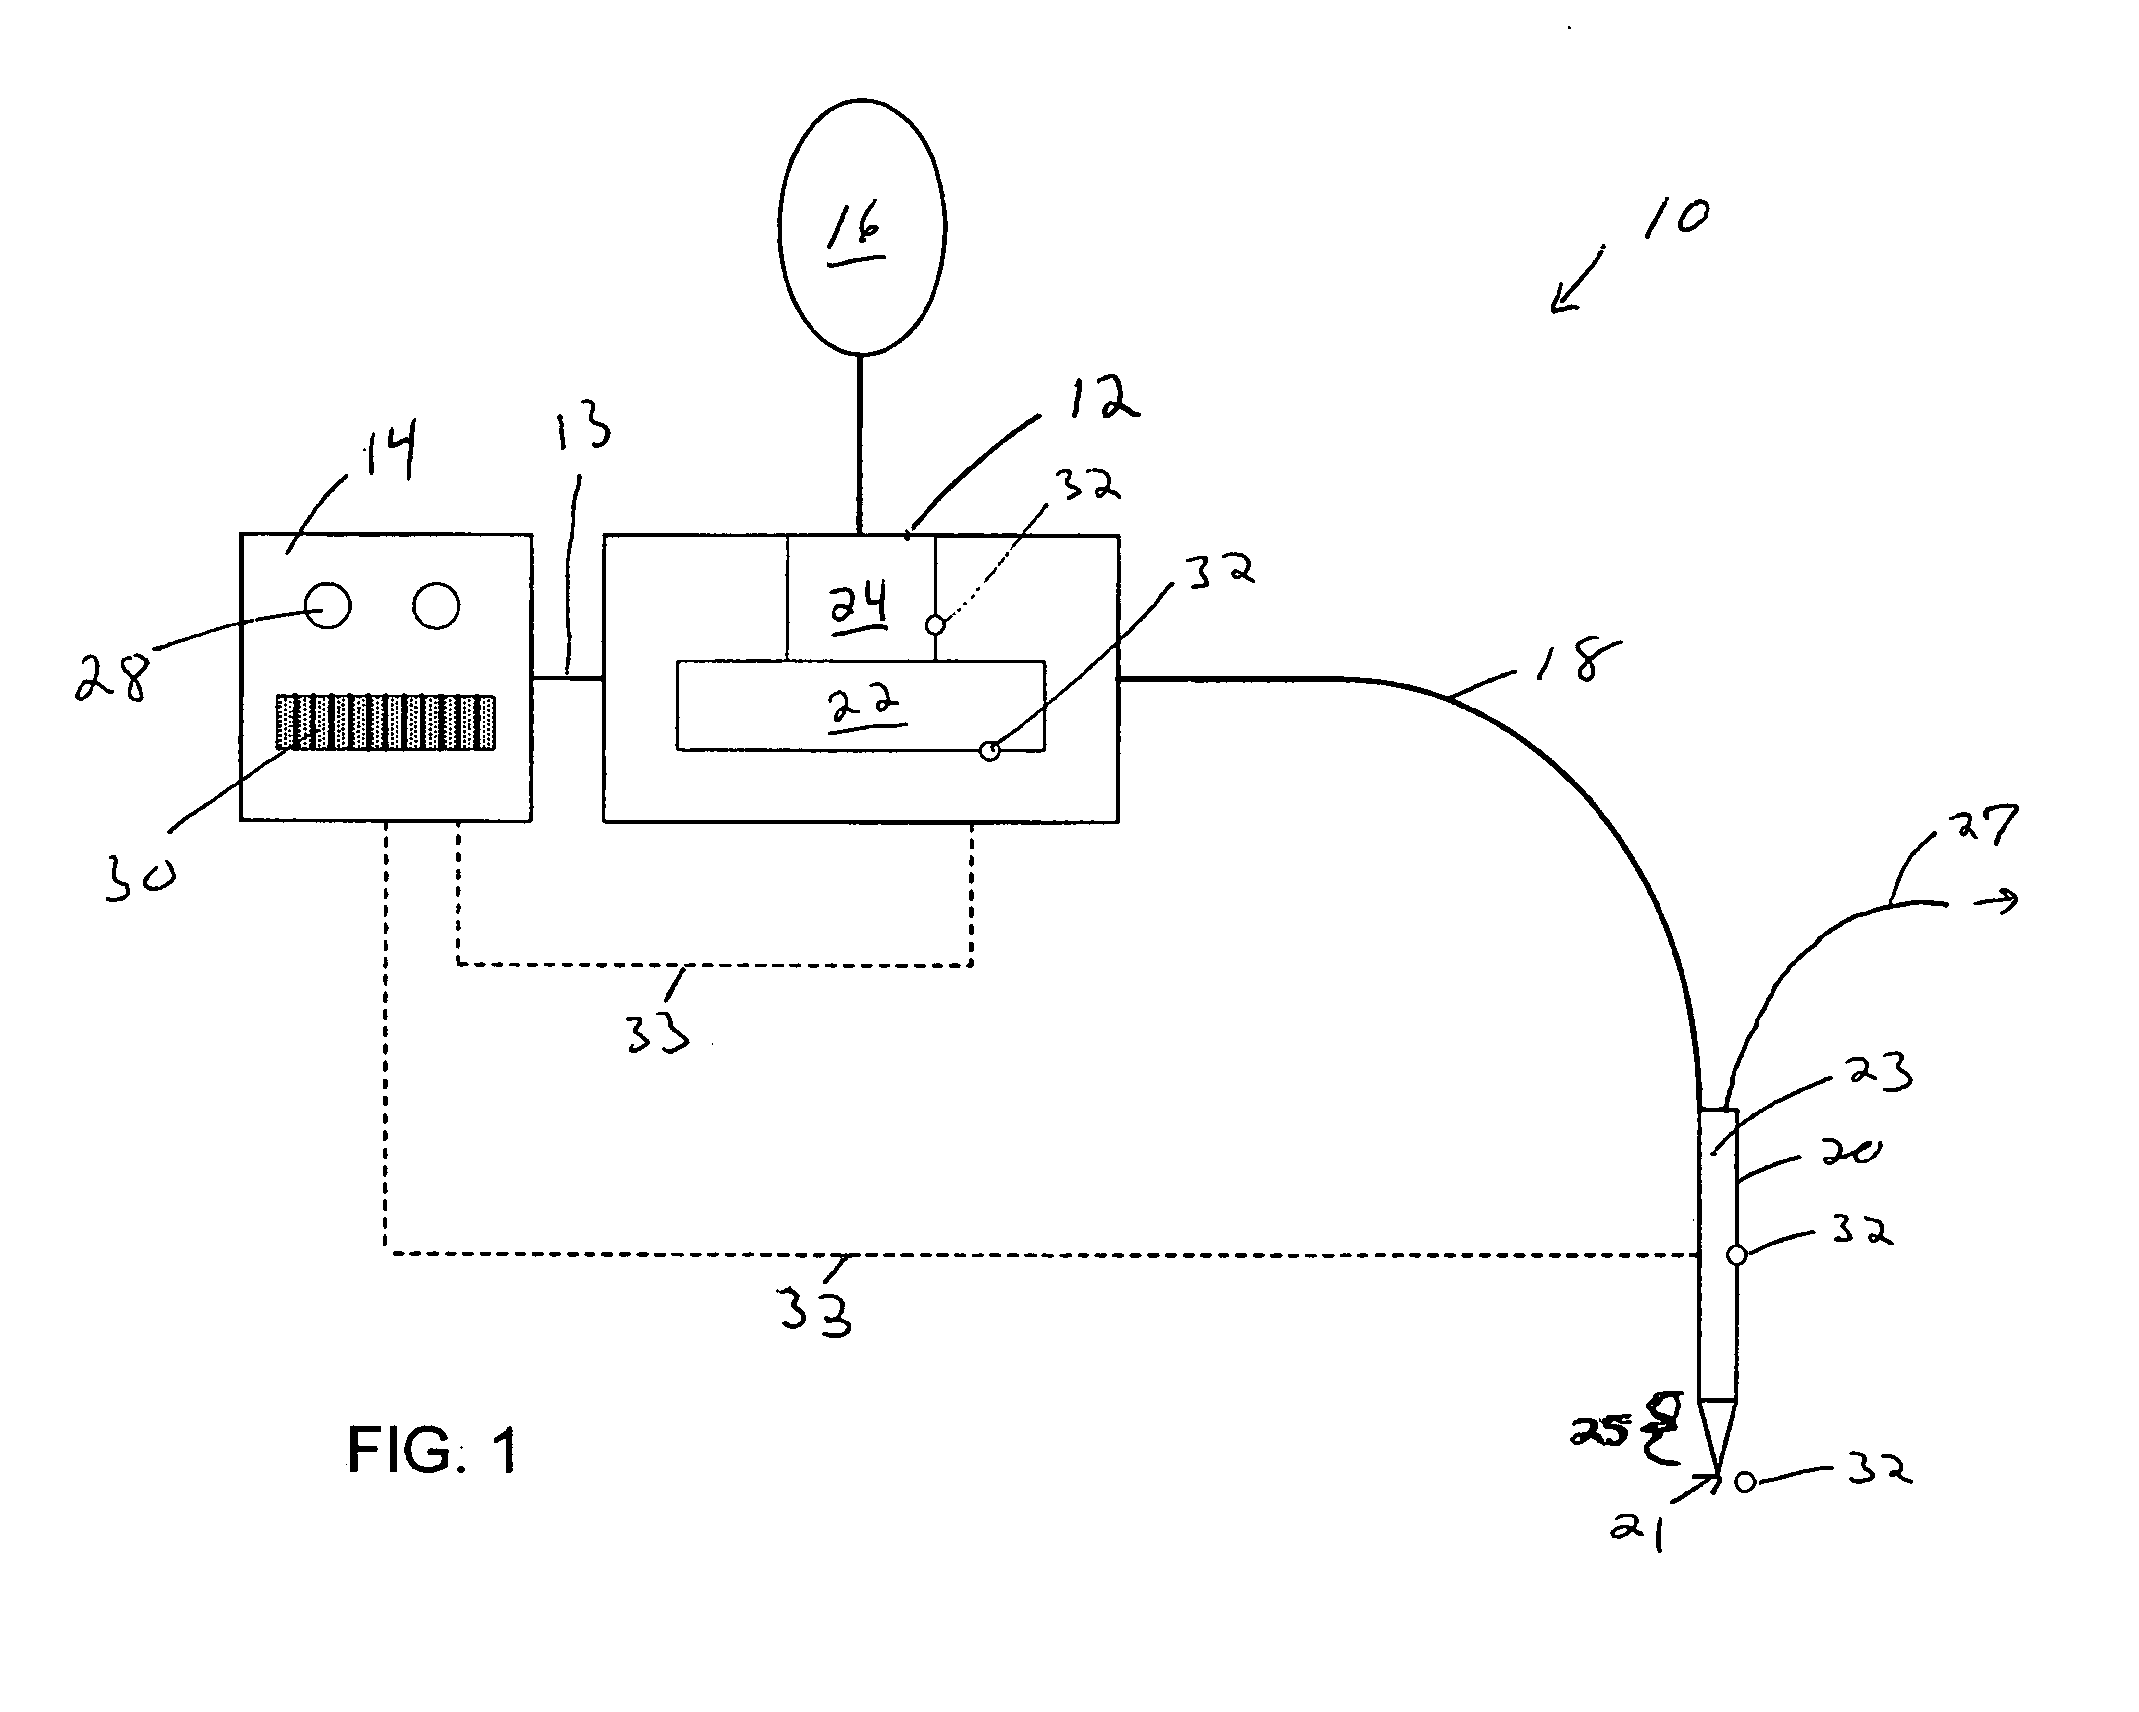 Fluid cutting device and method of use